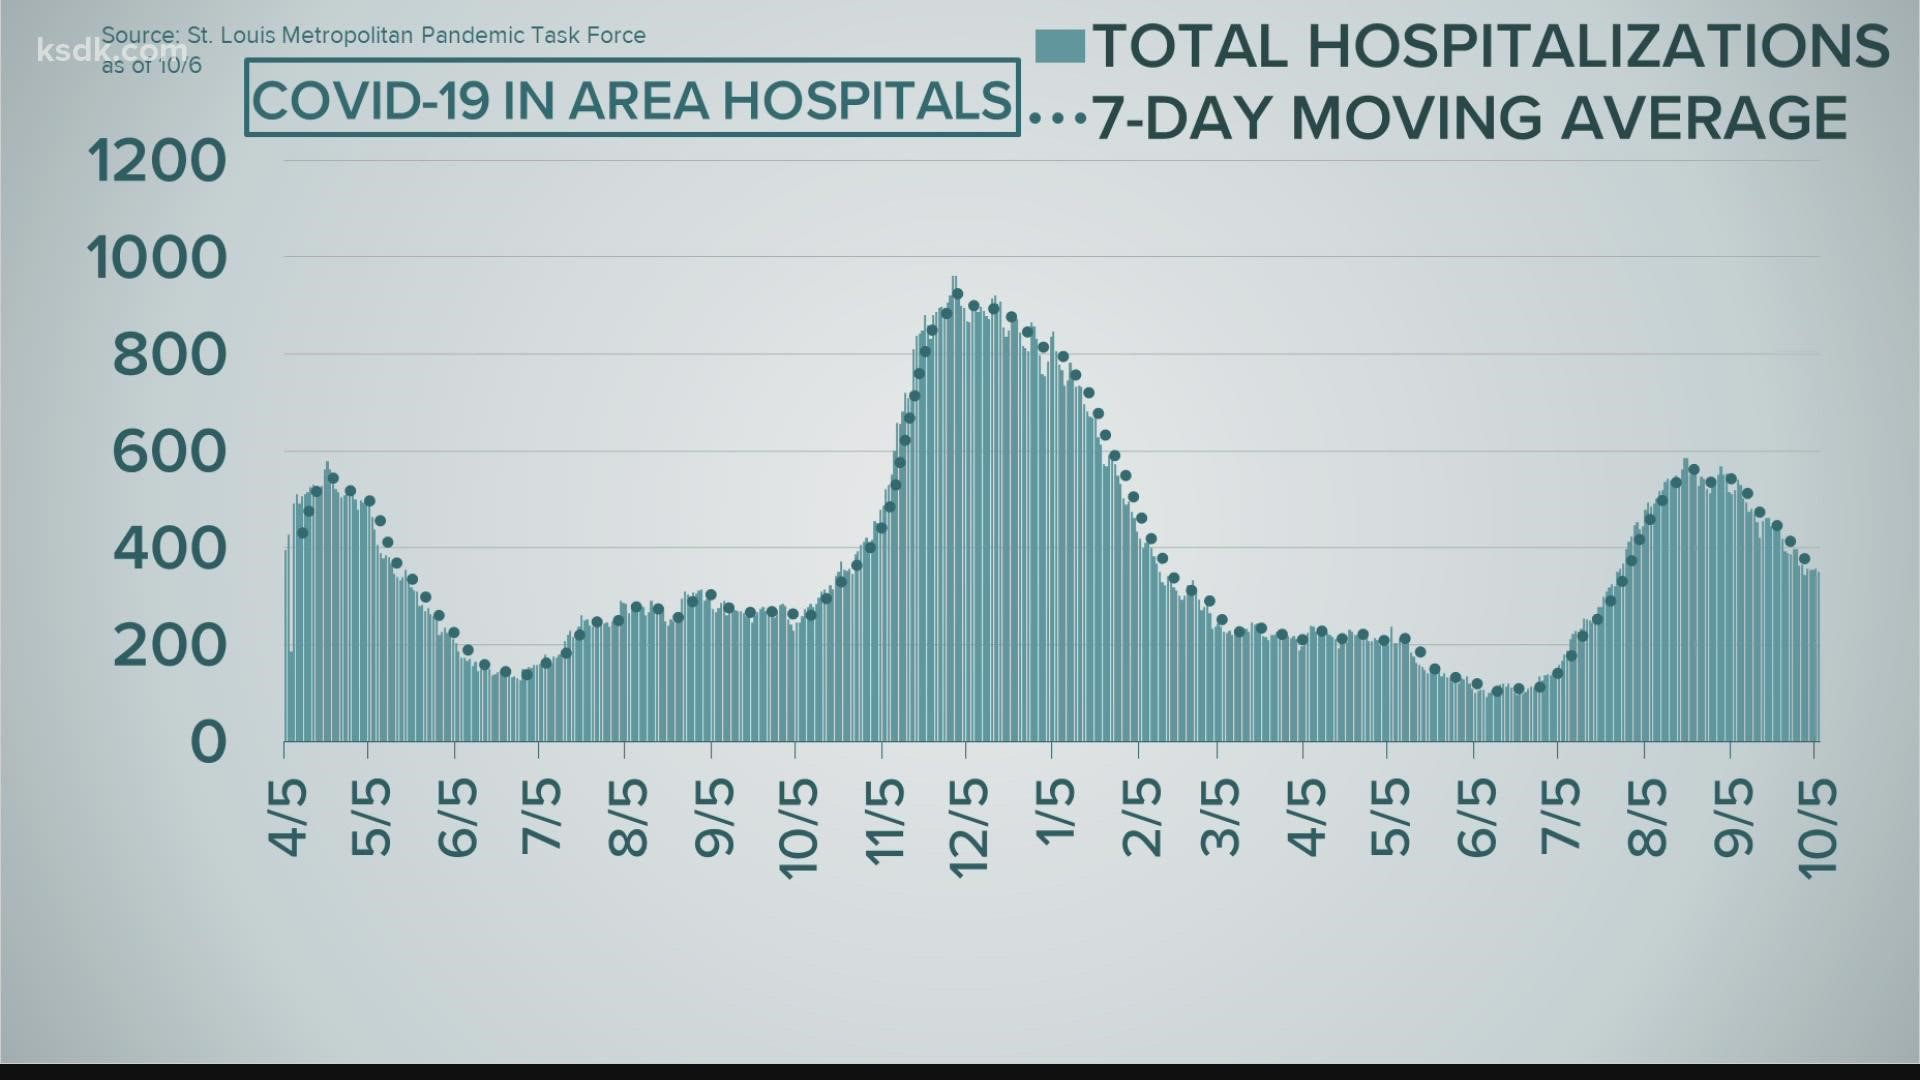 Hospitalizations and admissions are heading in the right direction as the winter holiday season approaches.